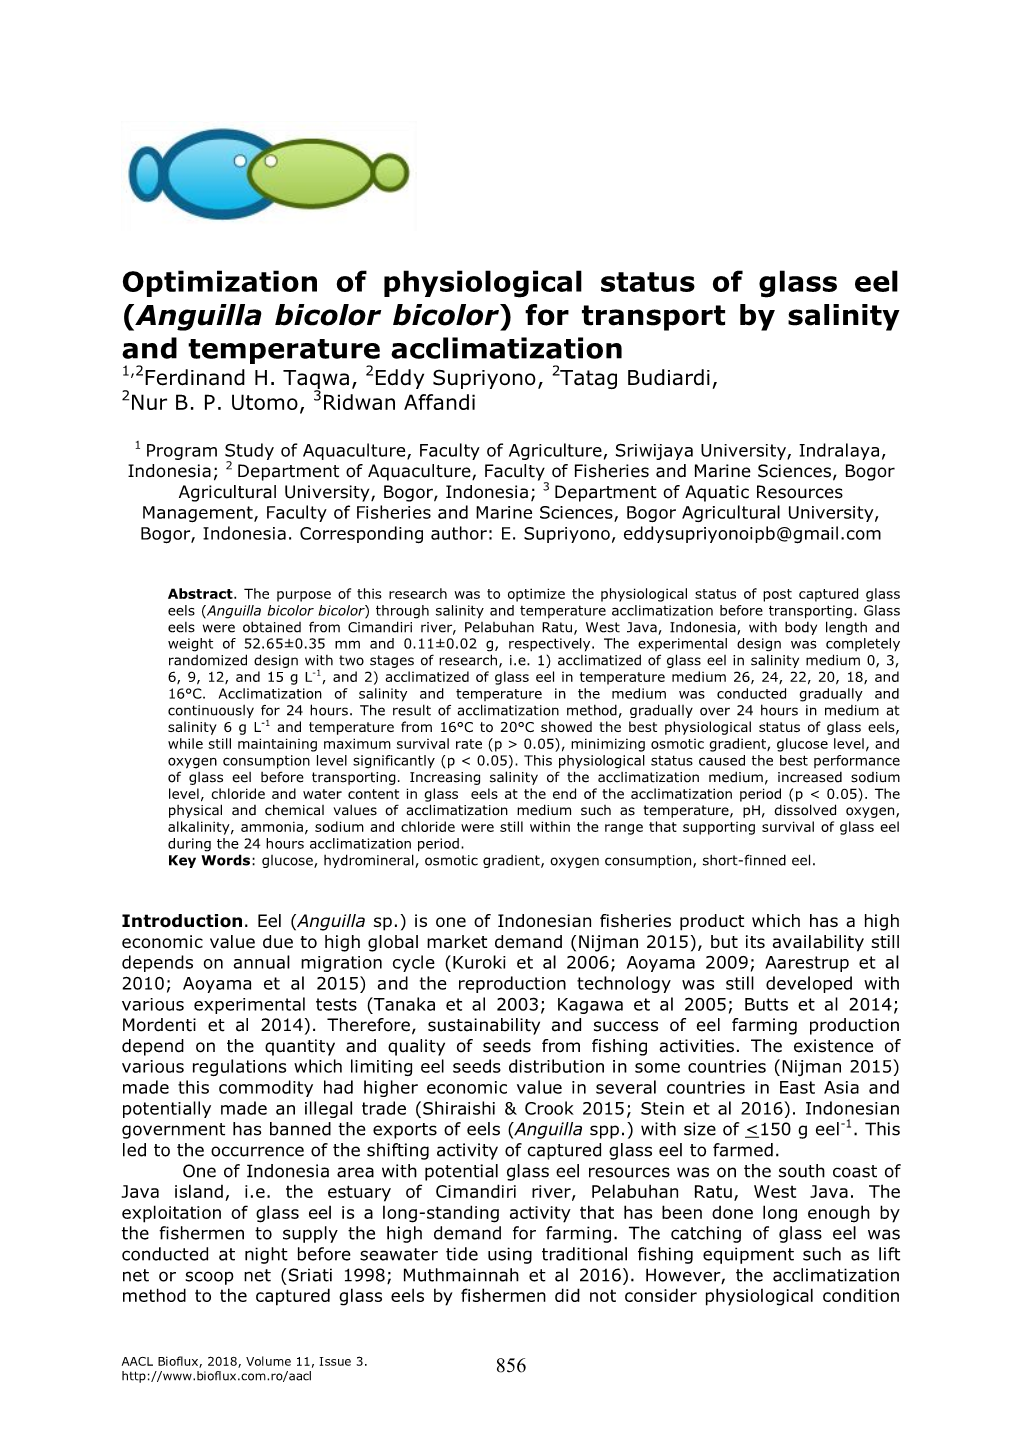 Optimization of Physiological Status of Glass Eel (Anguilla Bicolor Bicolor) for Transport by Salinity and Temperature Acclimatization 1,2Ferdinand H